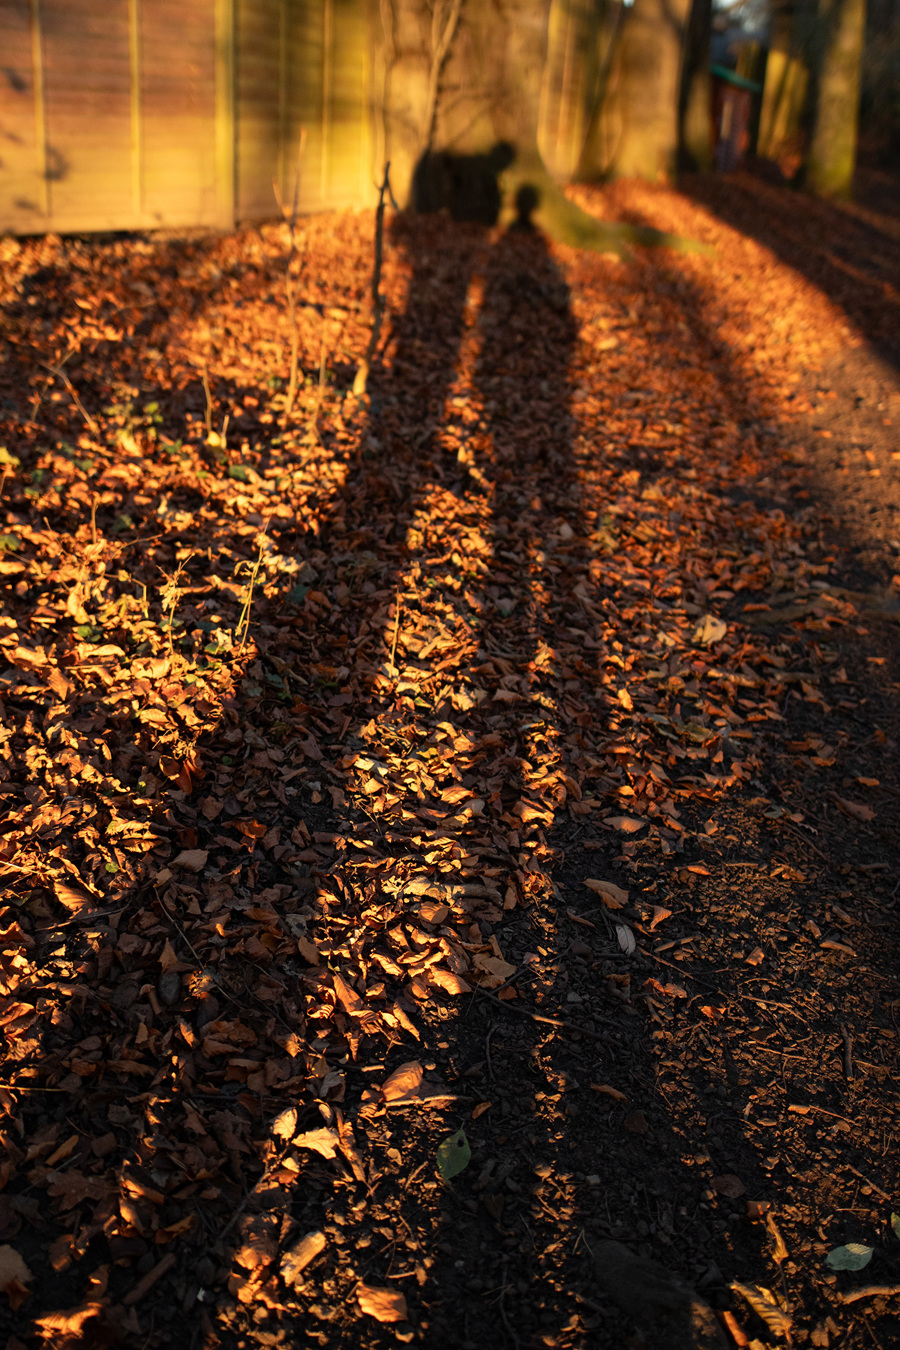  a shadow of a person on a path with leaves on the ground